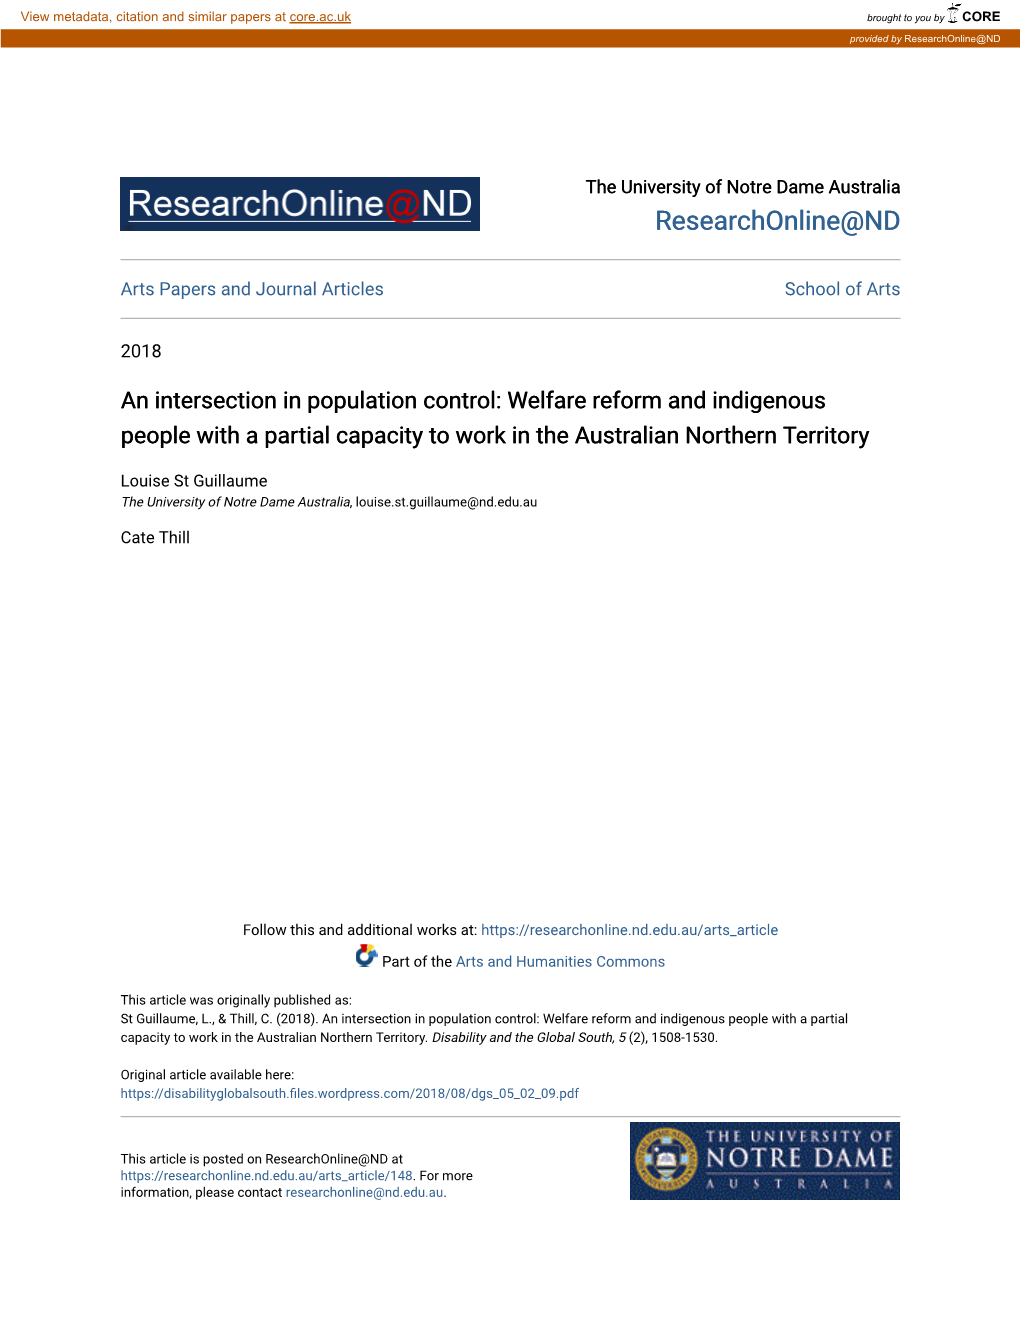 An Intersection in Population Control: Welfare Reform and Indigenous People with a Partial Capacity to Work in the Australian Northern Territory